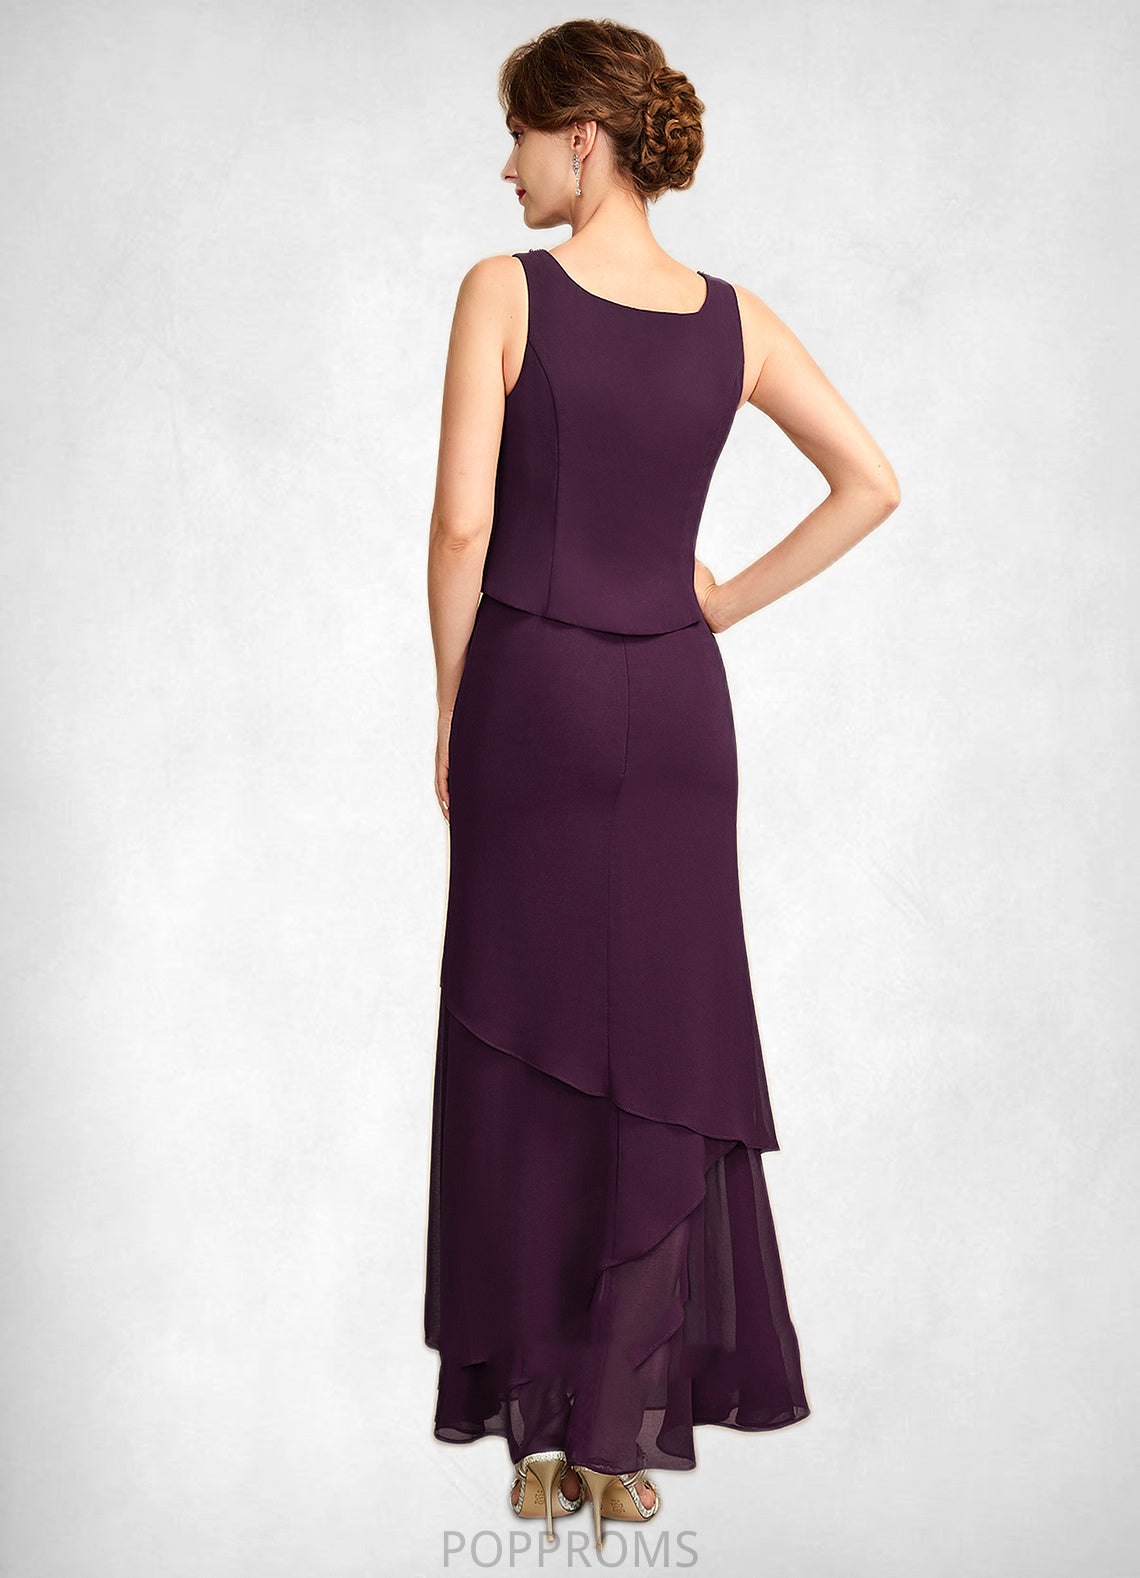 Giada Sheath/Column Scoop Neck Ankle-Length Chiffon Mother of the Bride Dress With Beading Sequins PP6126P0015024